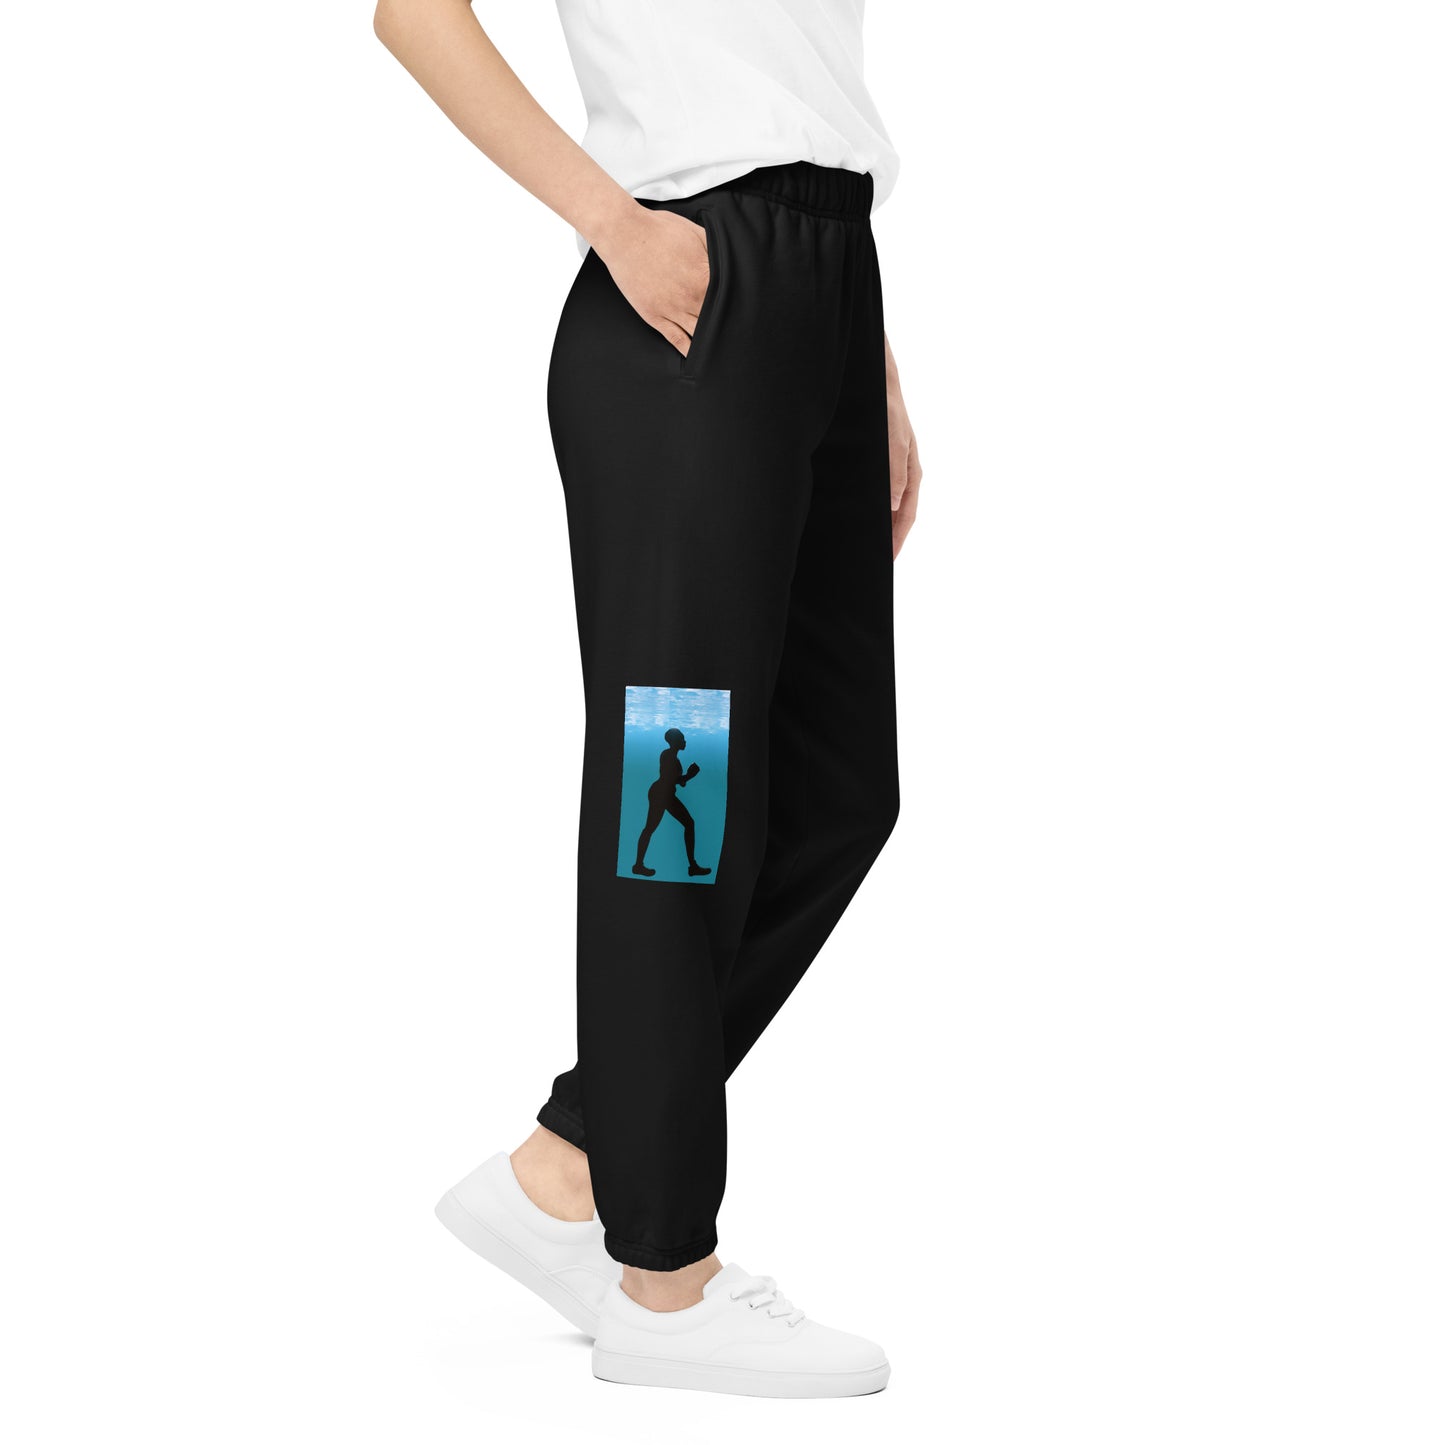 Fade in the Water Unisex Sweatpants